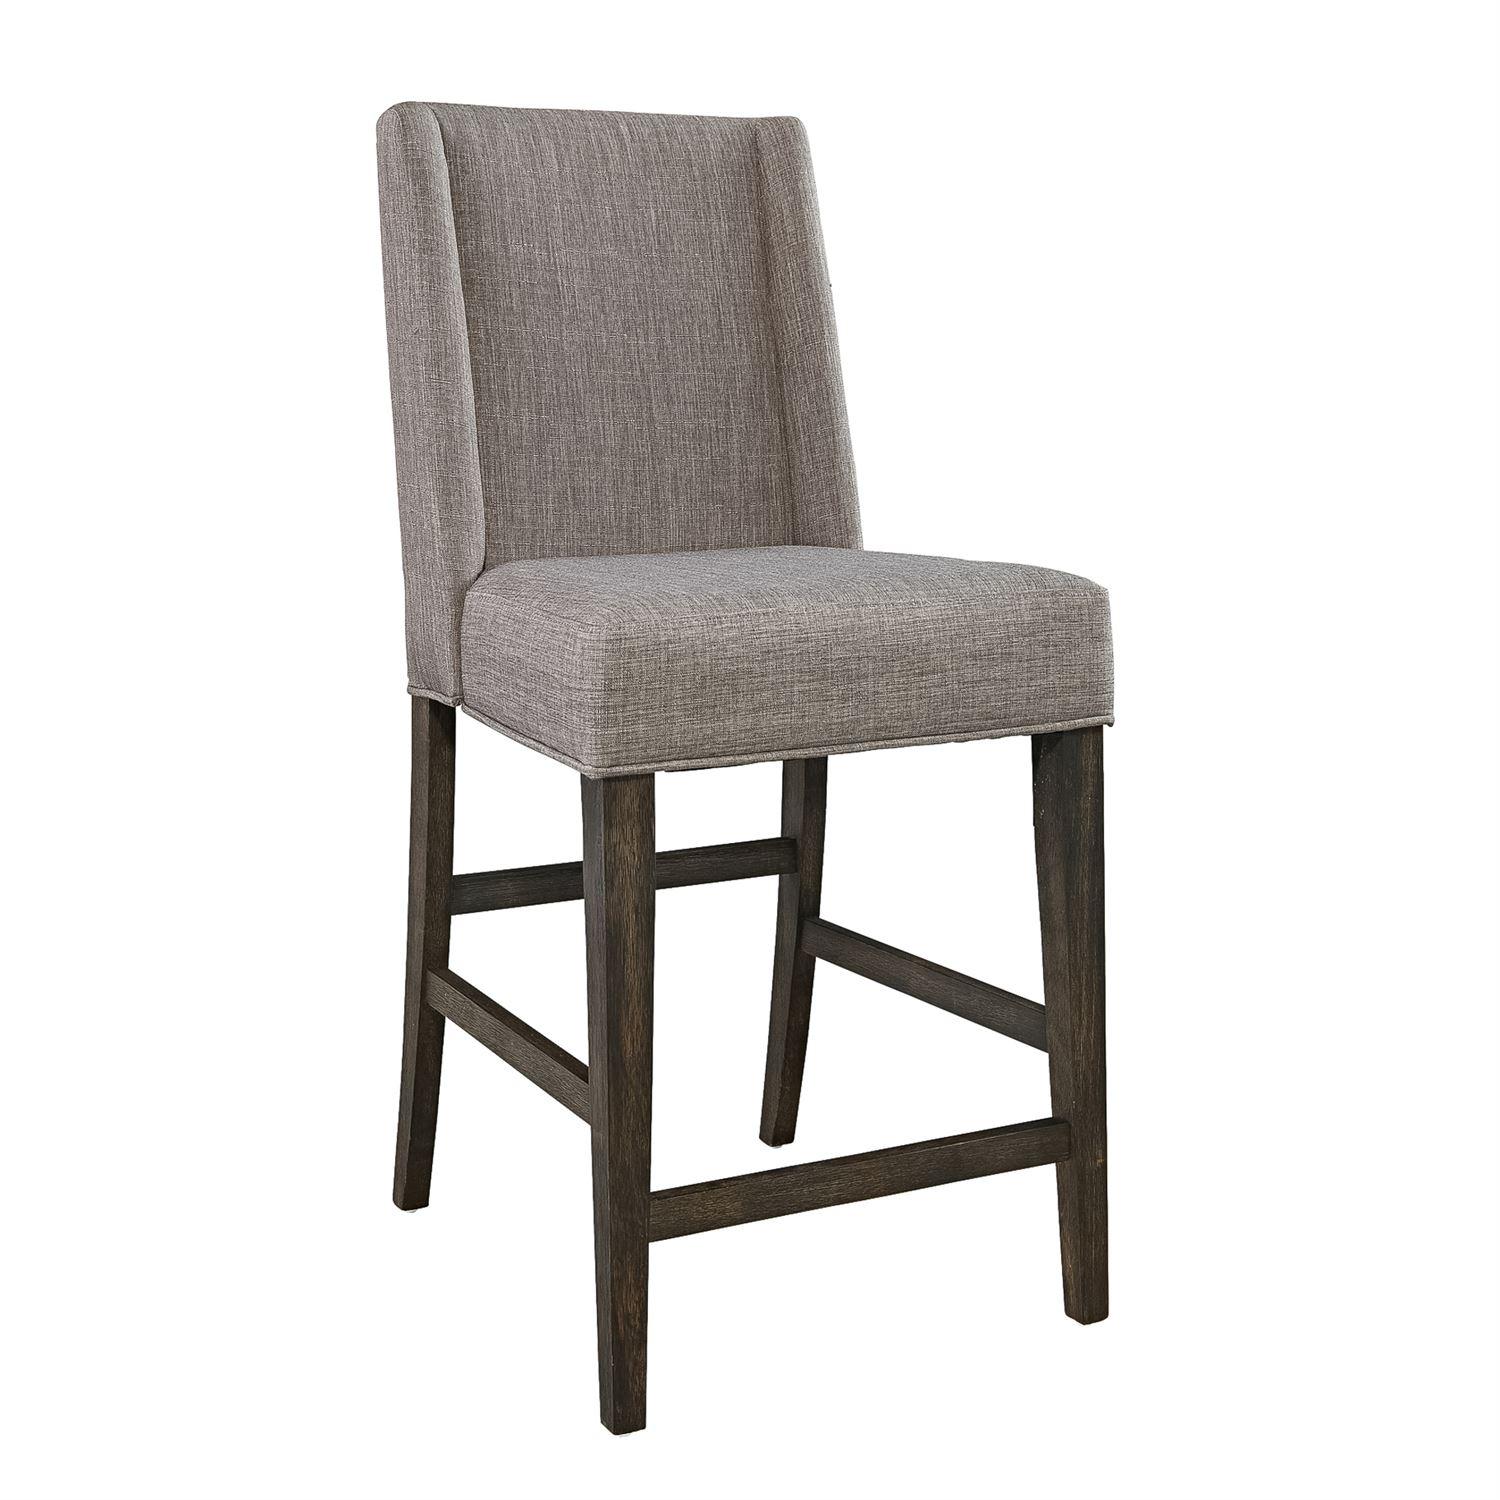 Rustic Counter Chair Double Bridge  (152-CD) Counter Chair 152-B650124 in Chestnut Fabric